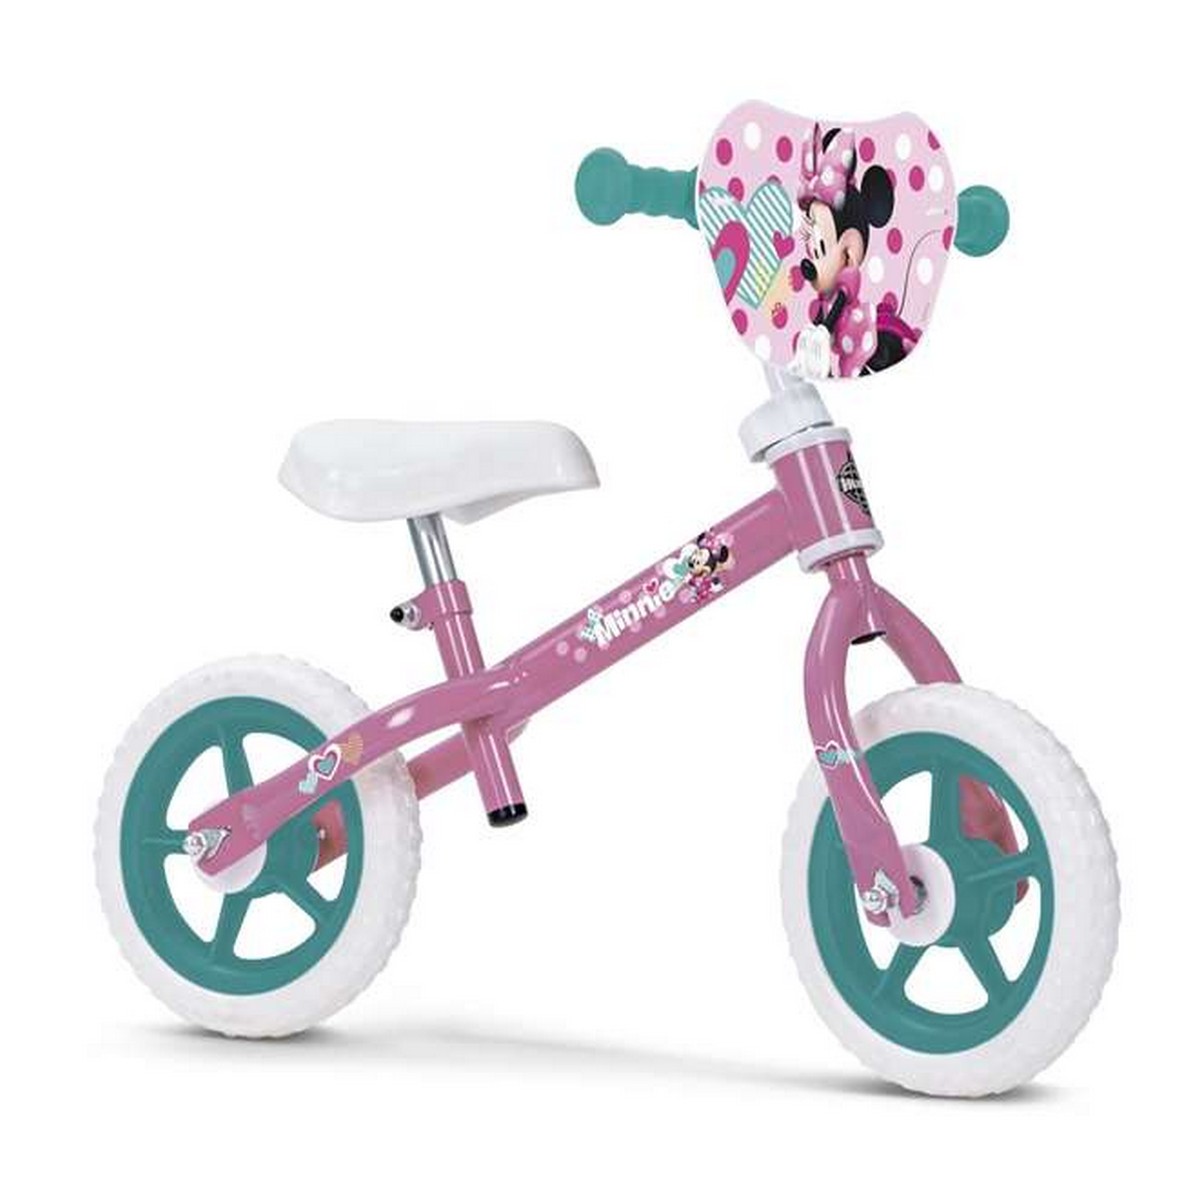 Children's Bike Toimsa Minnie Mouse Huffy Pink 10" Without pedals